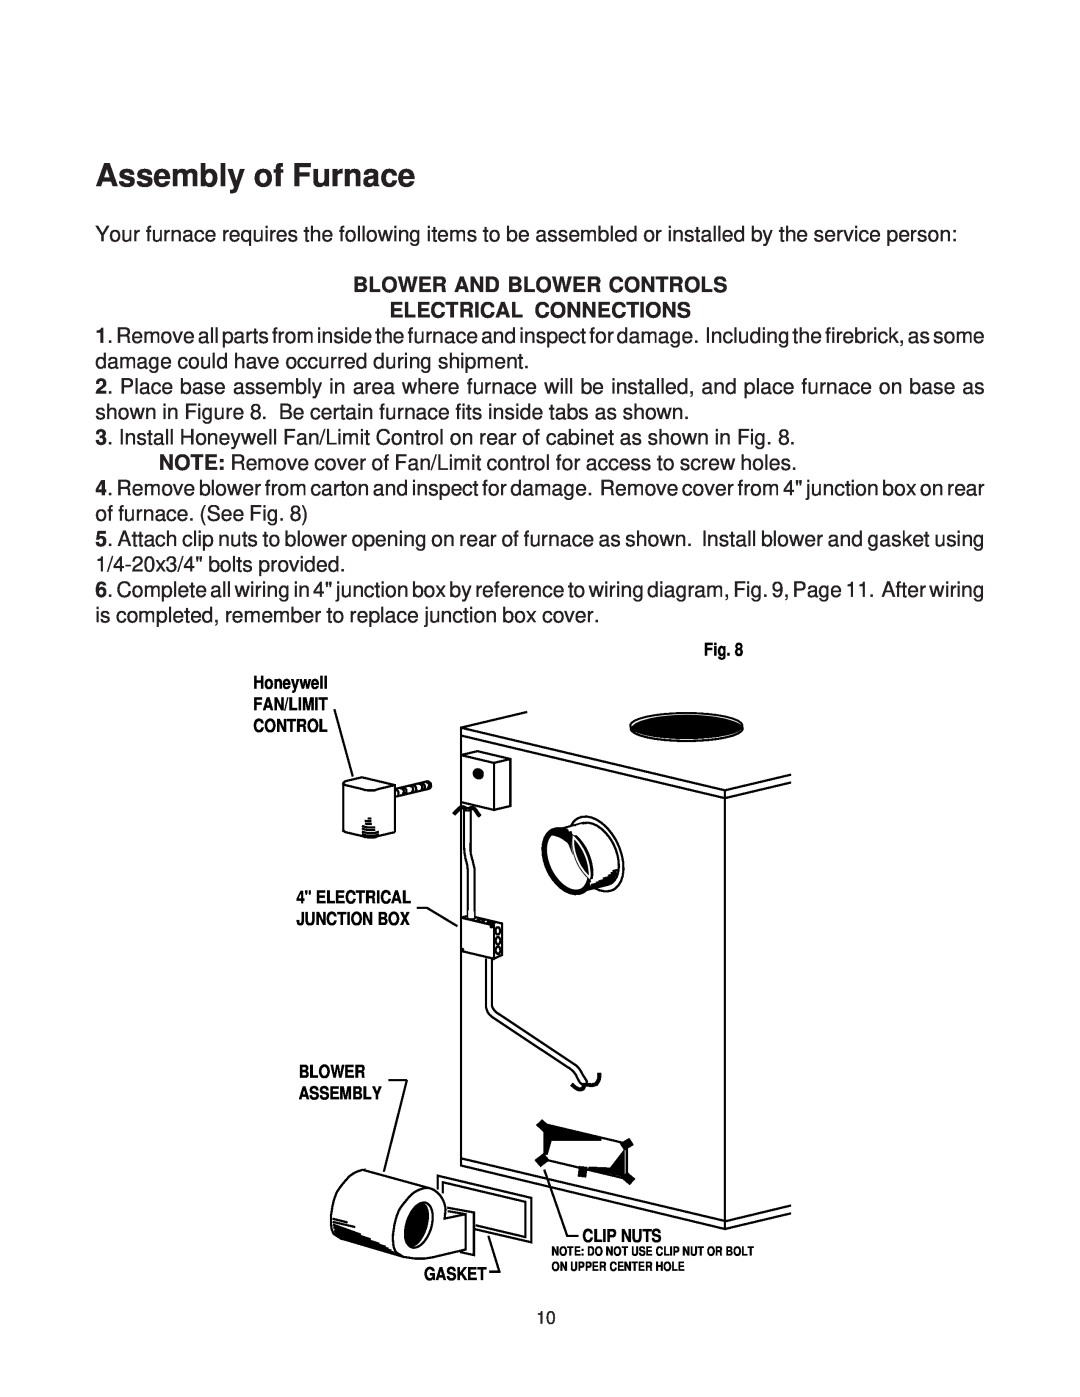 United States Stove 1321 warranty Assembly of Furnace, Blower And Blower Controls Electrical Connections 